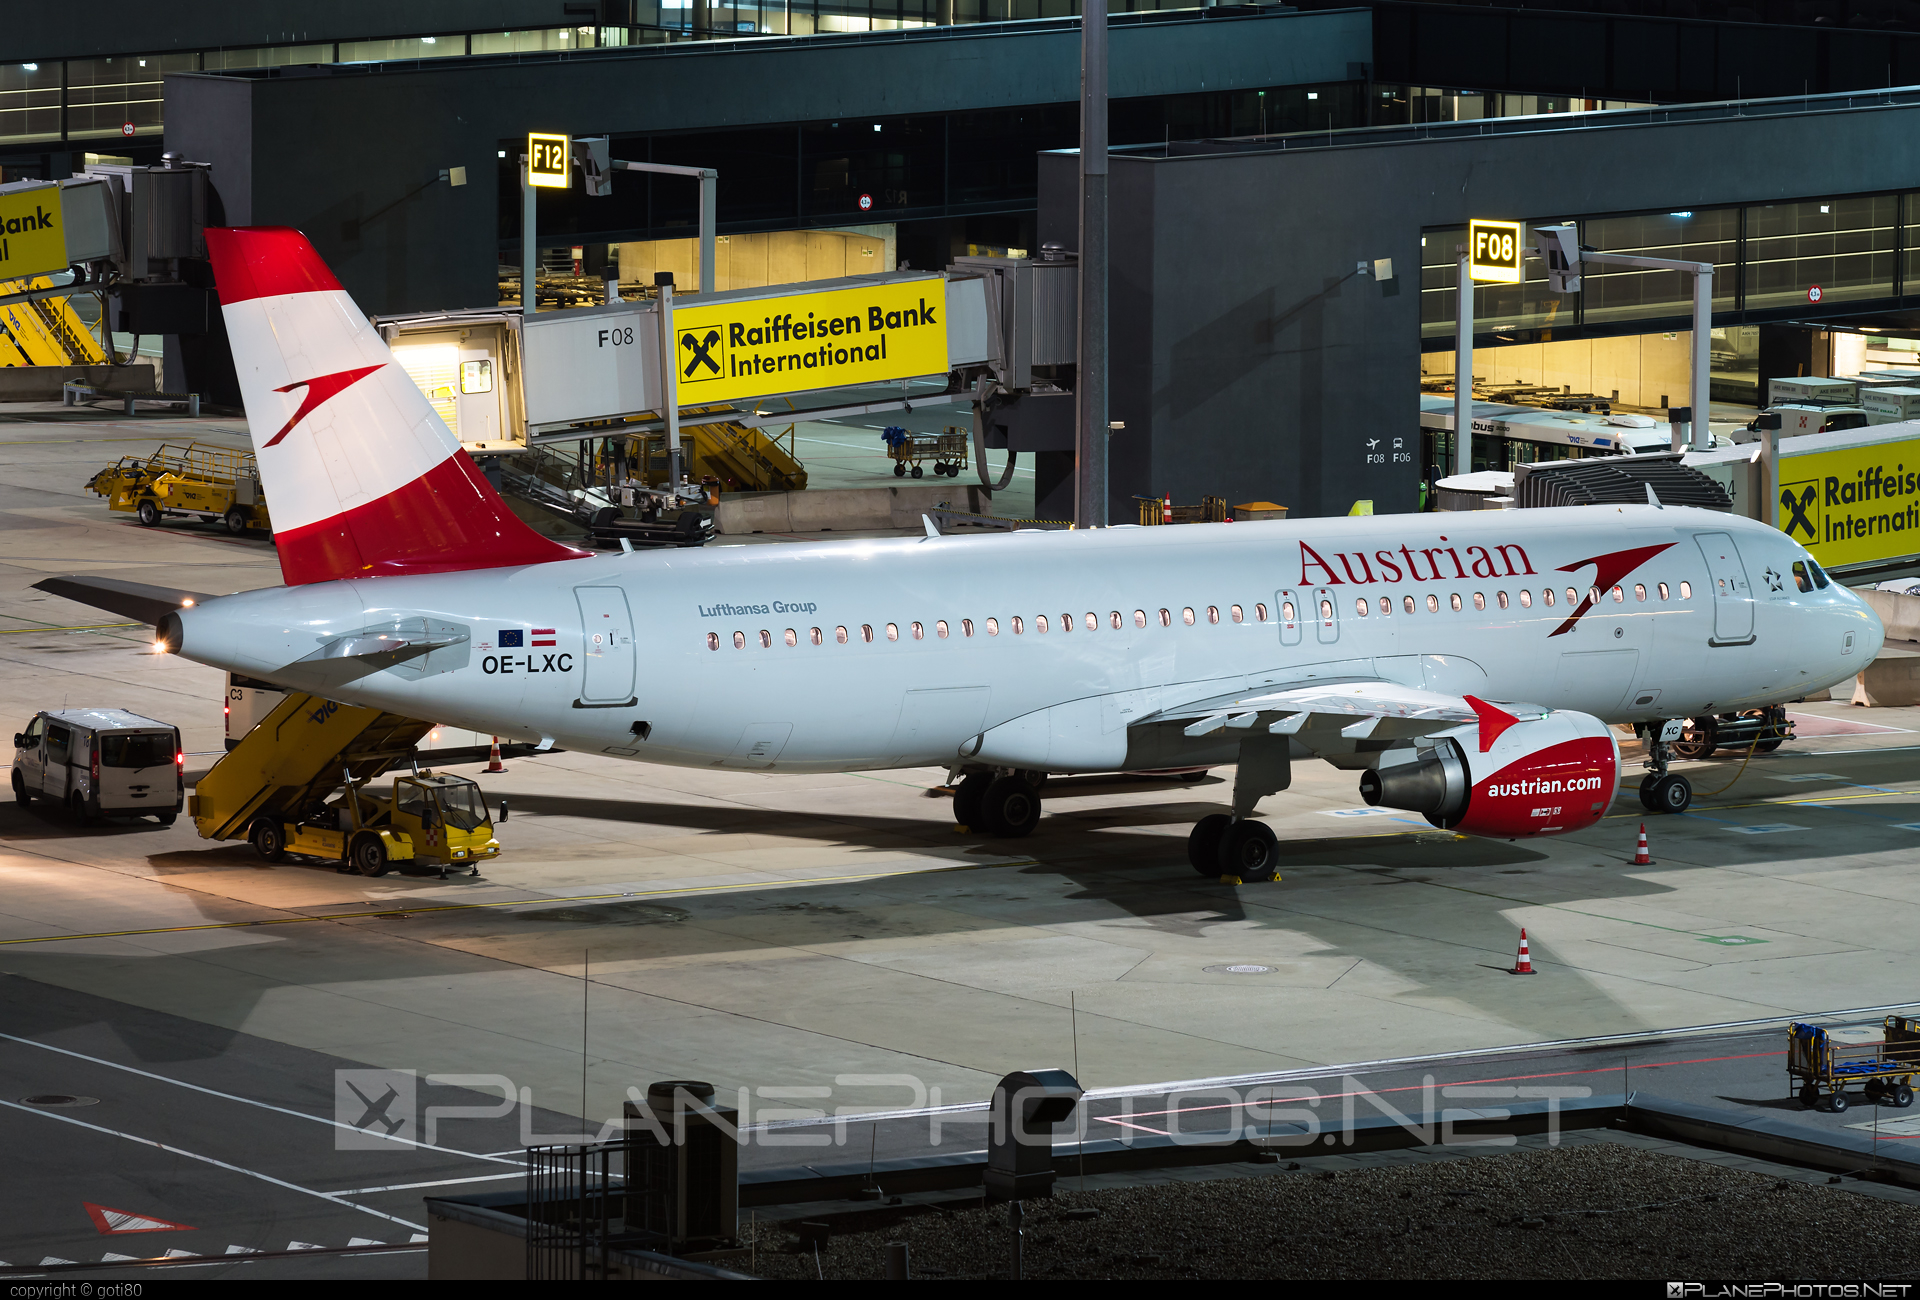 Airbus A320-216 - OE-LXC operated by Austrian Airlines #a320 #a320family #airbus #airbus320 #austrian #austrianAirlines